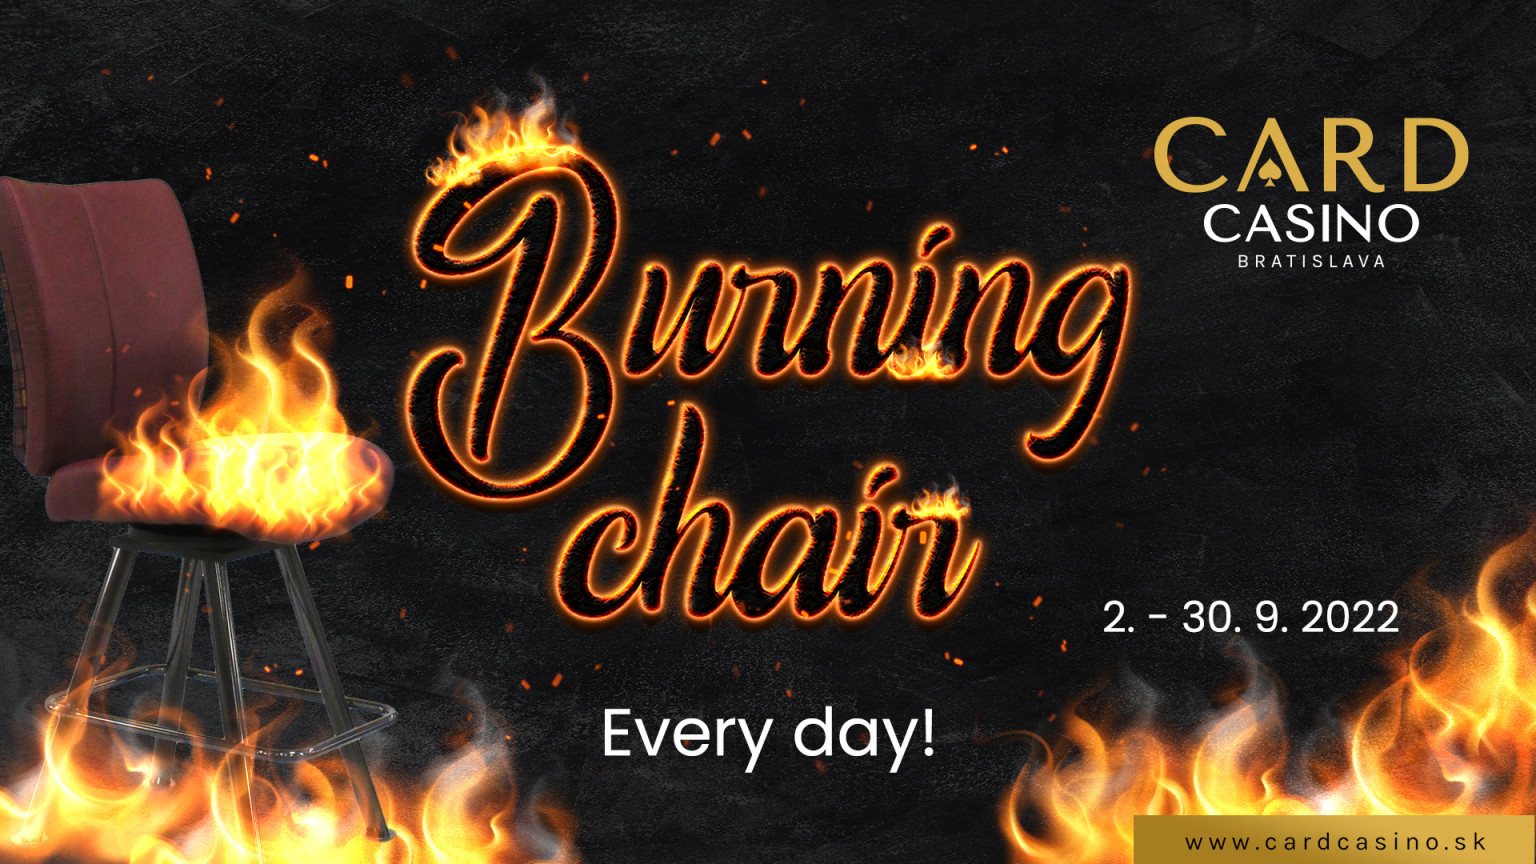 September is going to be hot for jackpot wins with the Burning Chair!